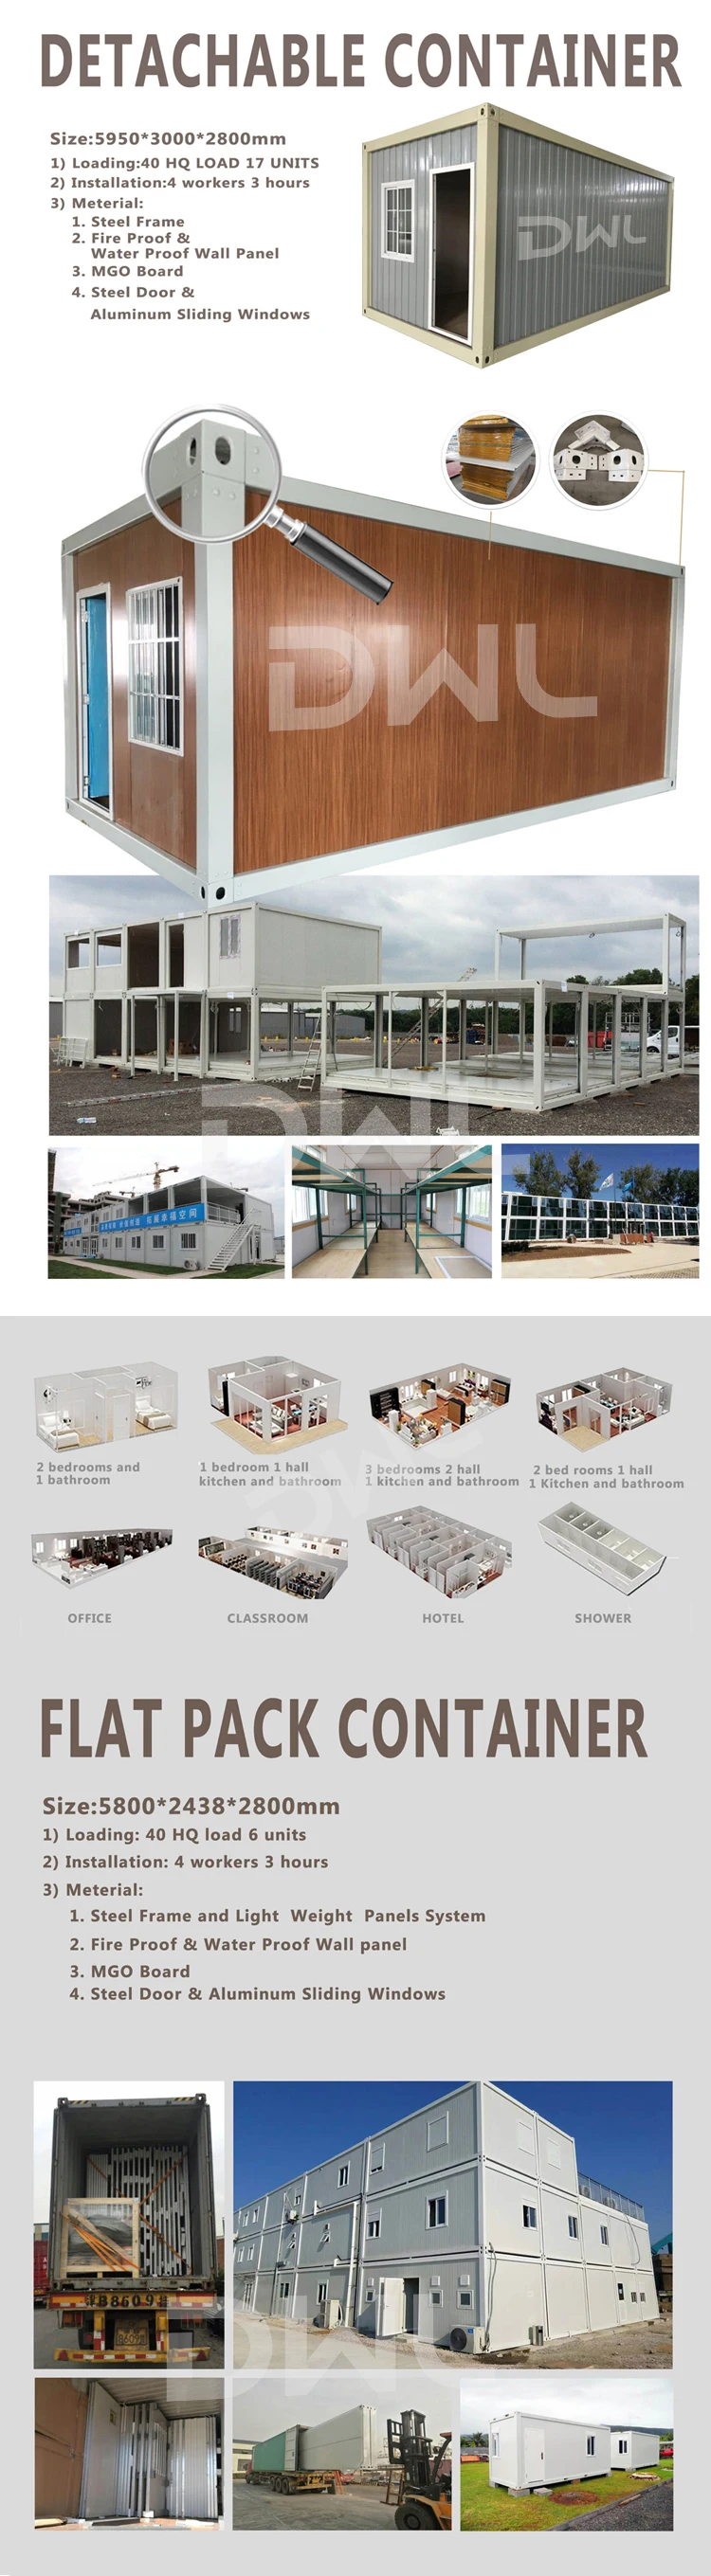 prefabricated containers.jpg